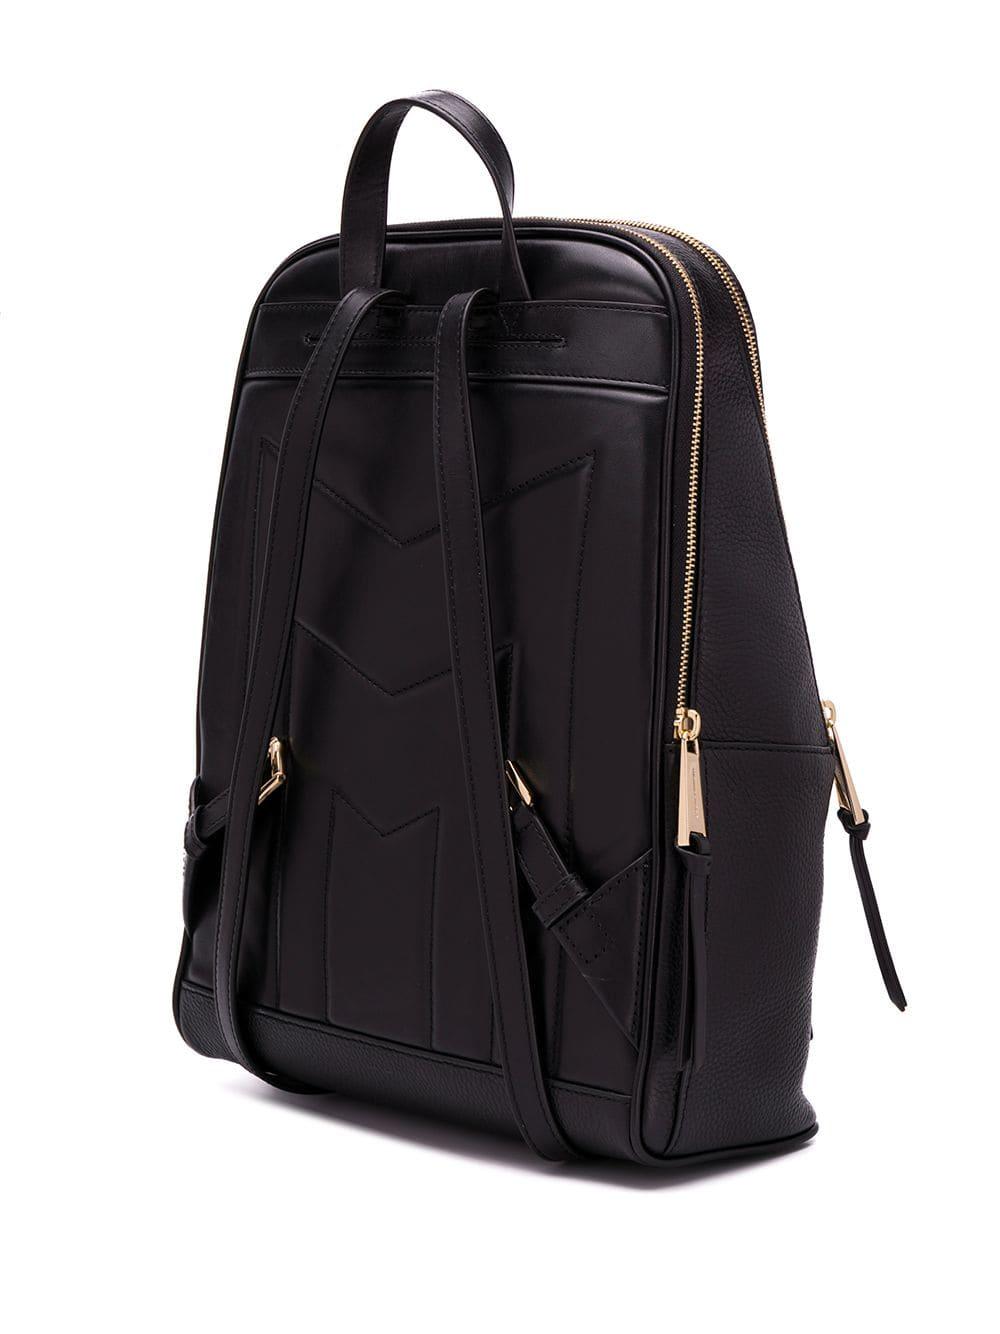 MICHAEL Michael Kors Leather Toby Backpack in Black - Lyst